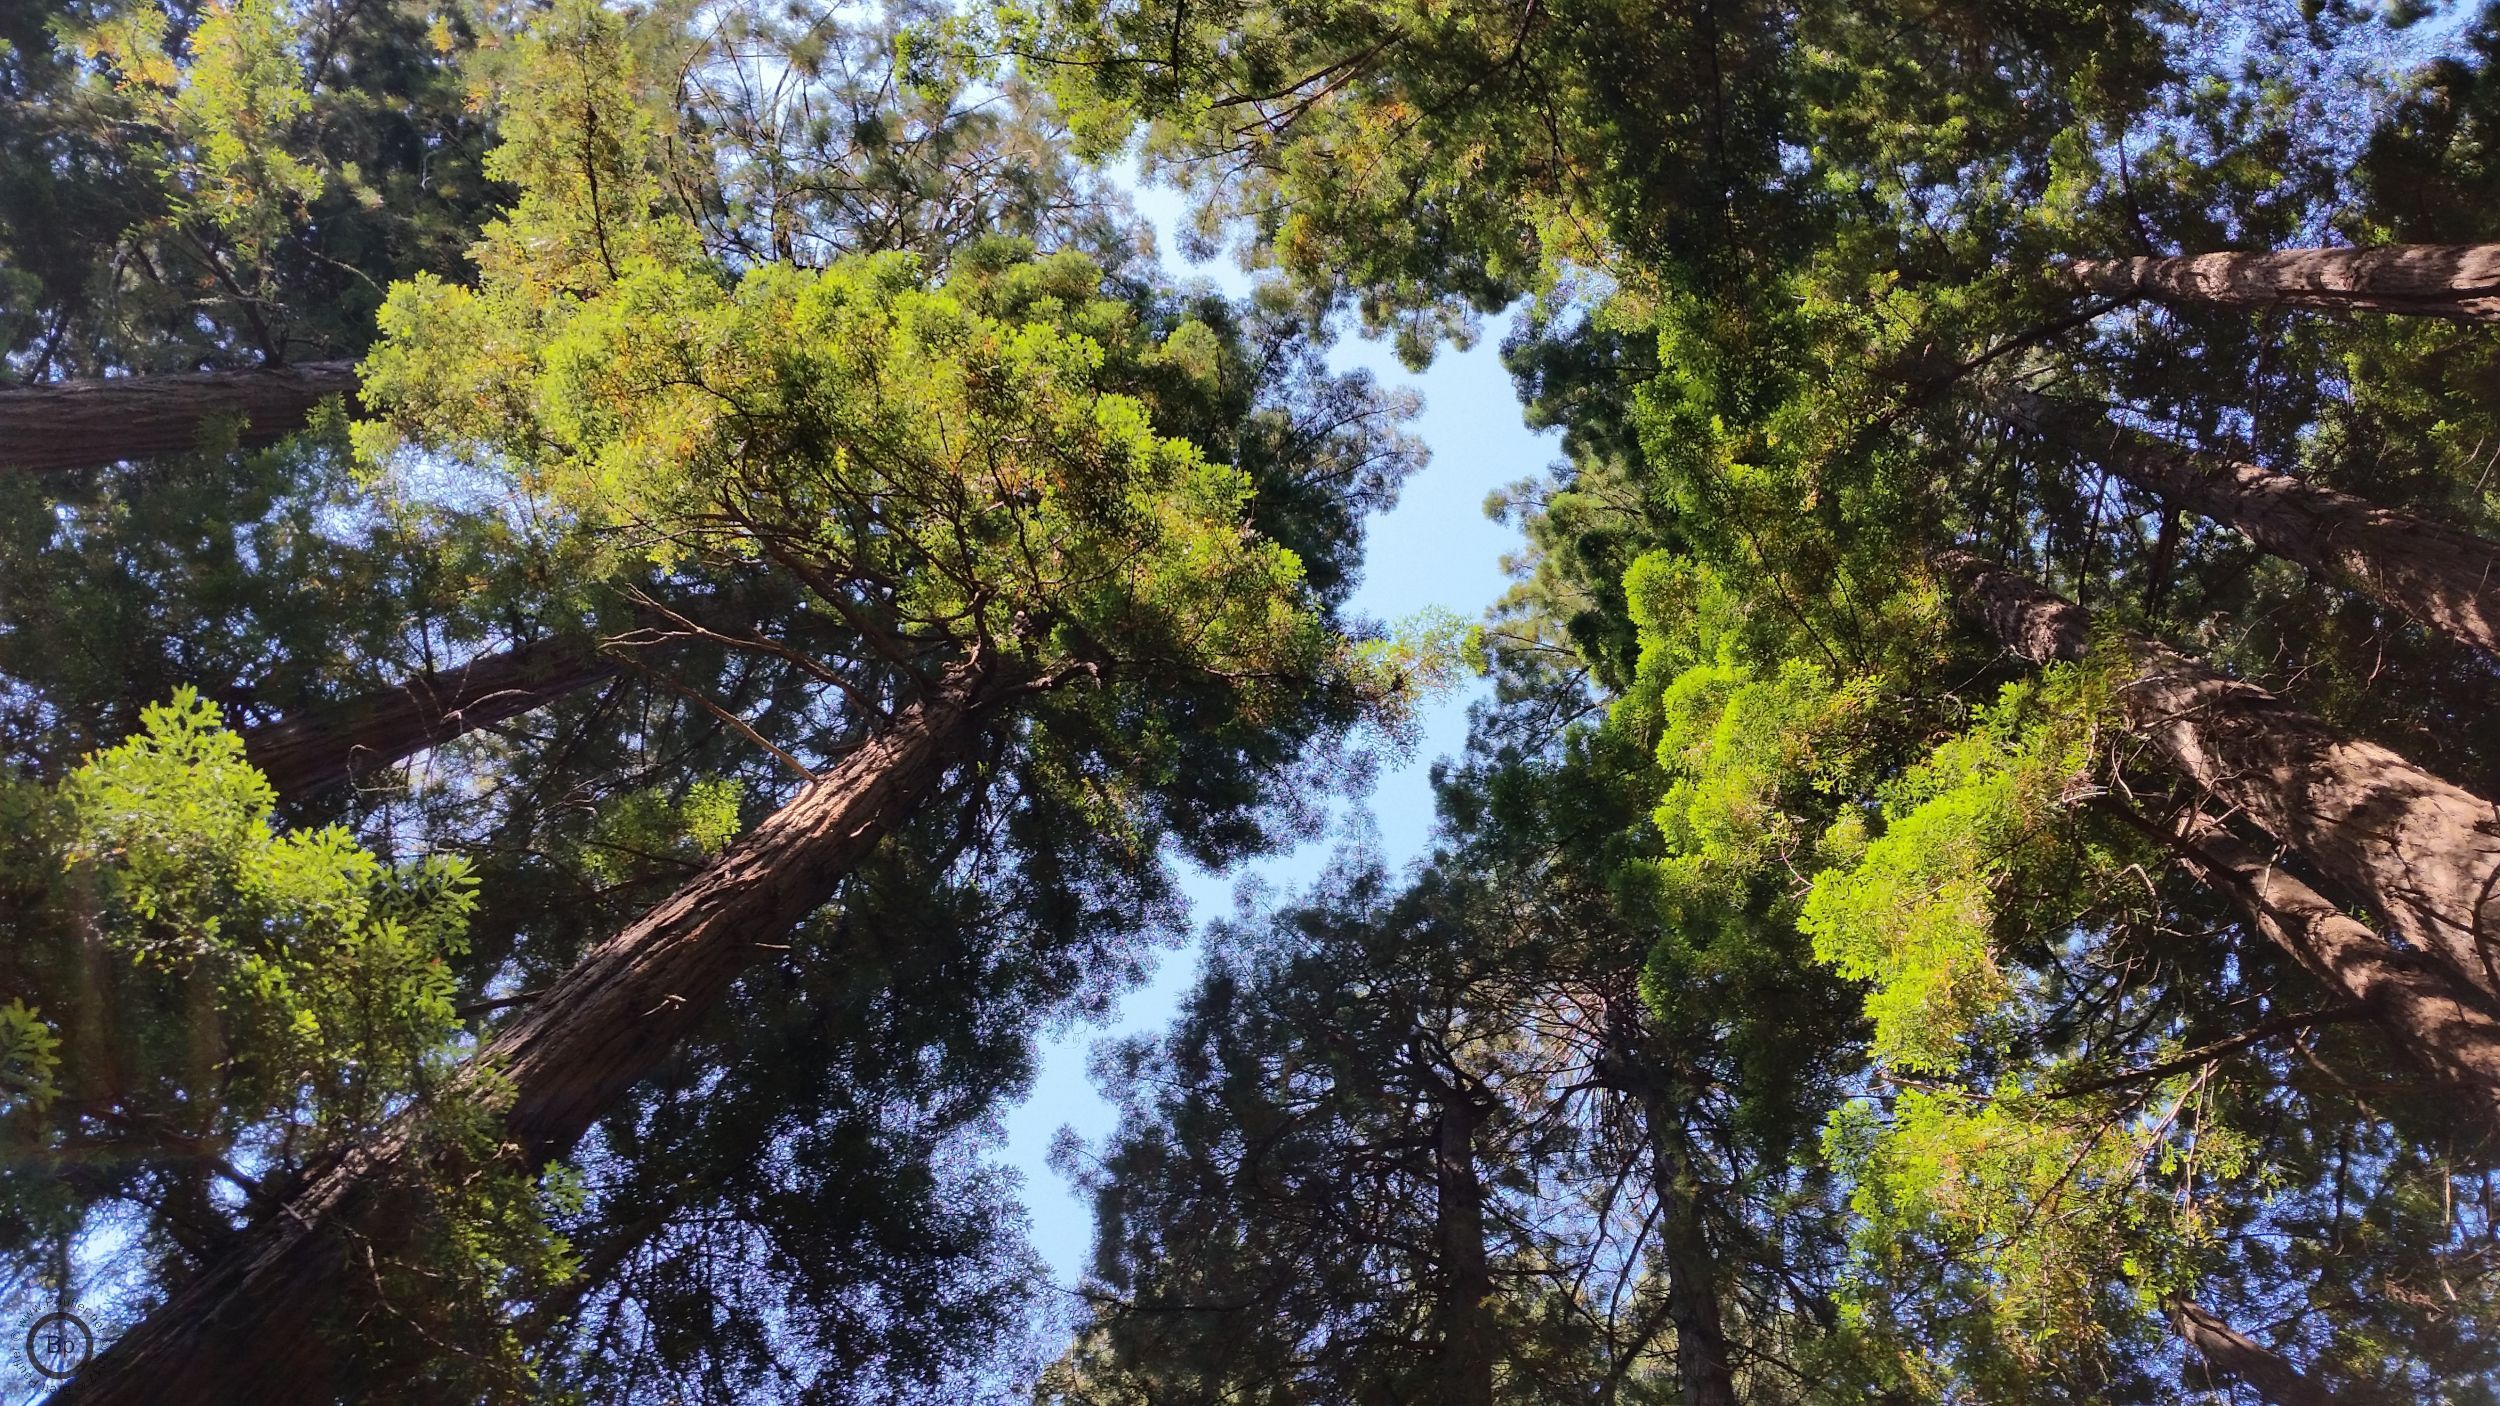 Muir Woods 2017, summer, this is a view looking up at the treetops, I took lots of panoramic images, panning from top to bottom, but in the end, I did not care for any of them, fun to take, but not the images I was looking for, the green in the trees is quite nice in this one, it is why this image beat out the others like it